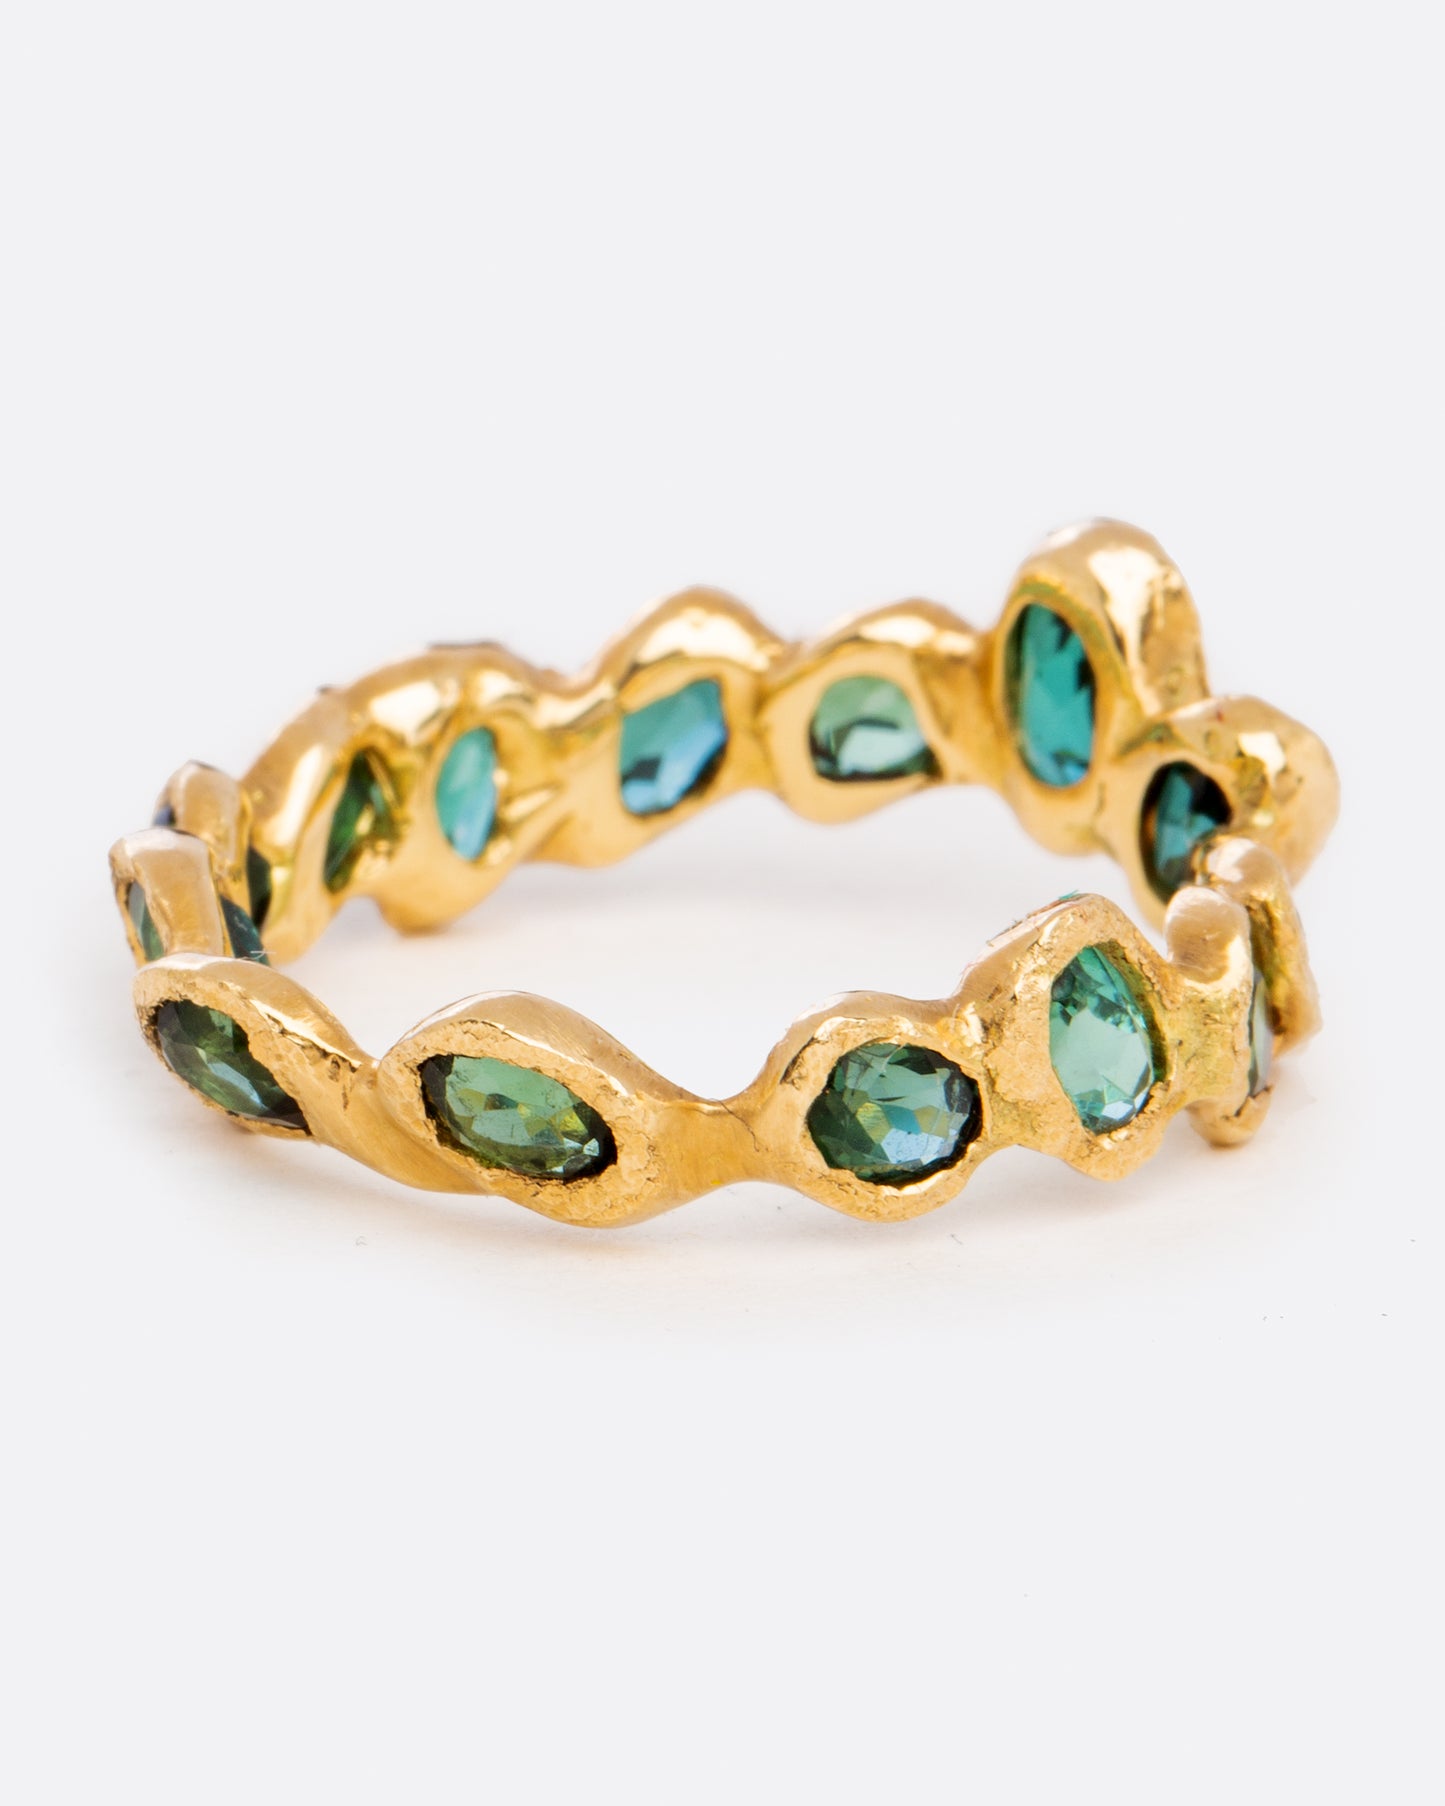 A yellow gold eternity band ring with oval blue green tourmalines, each set facing slightly askew.